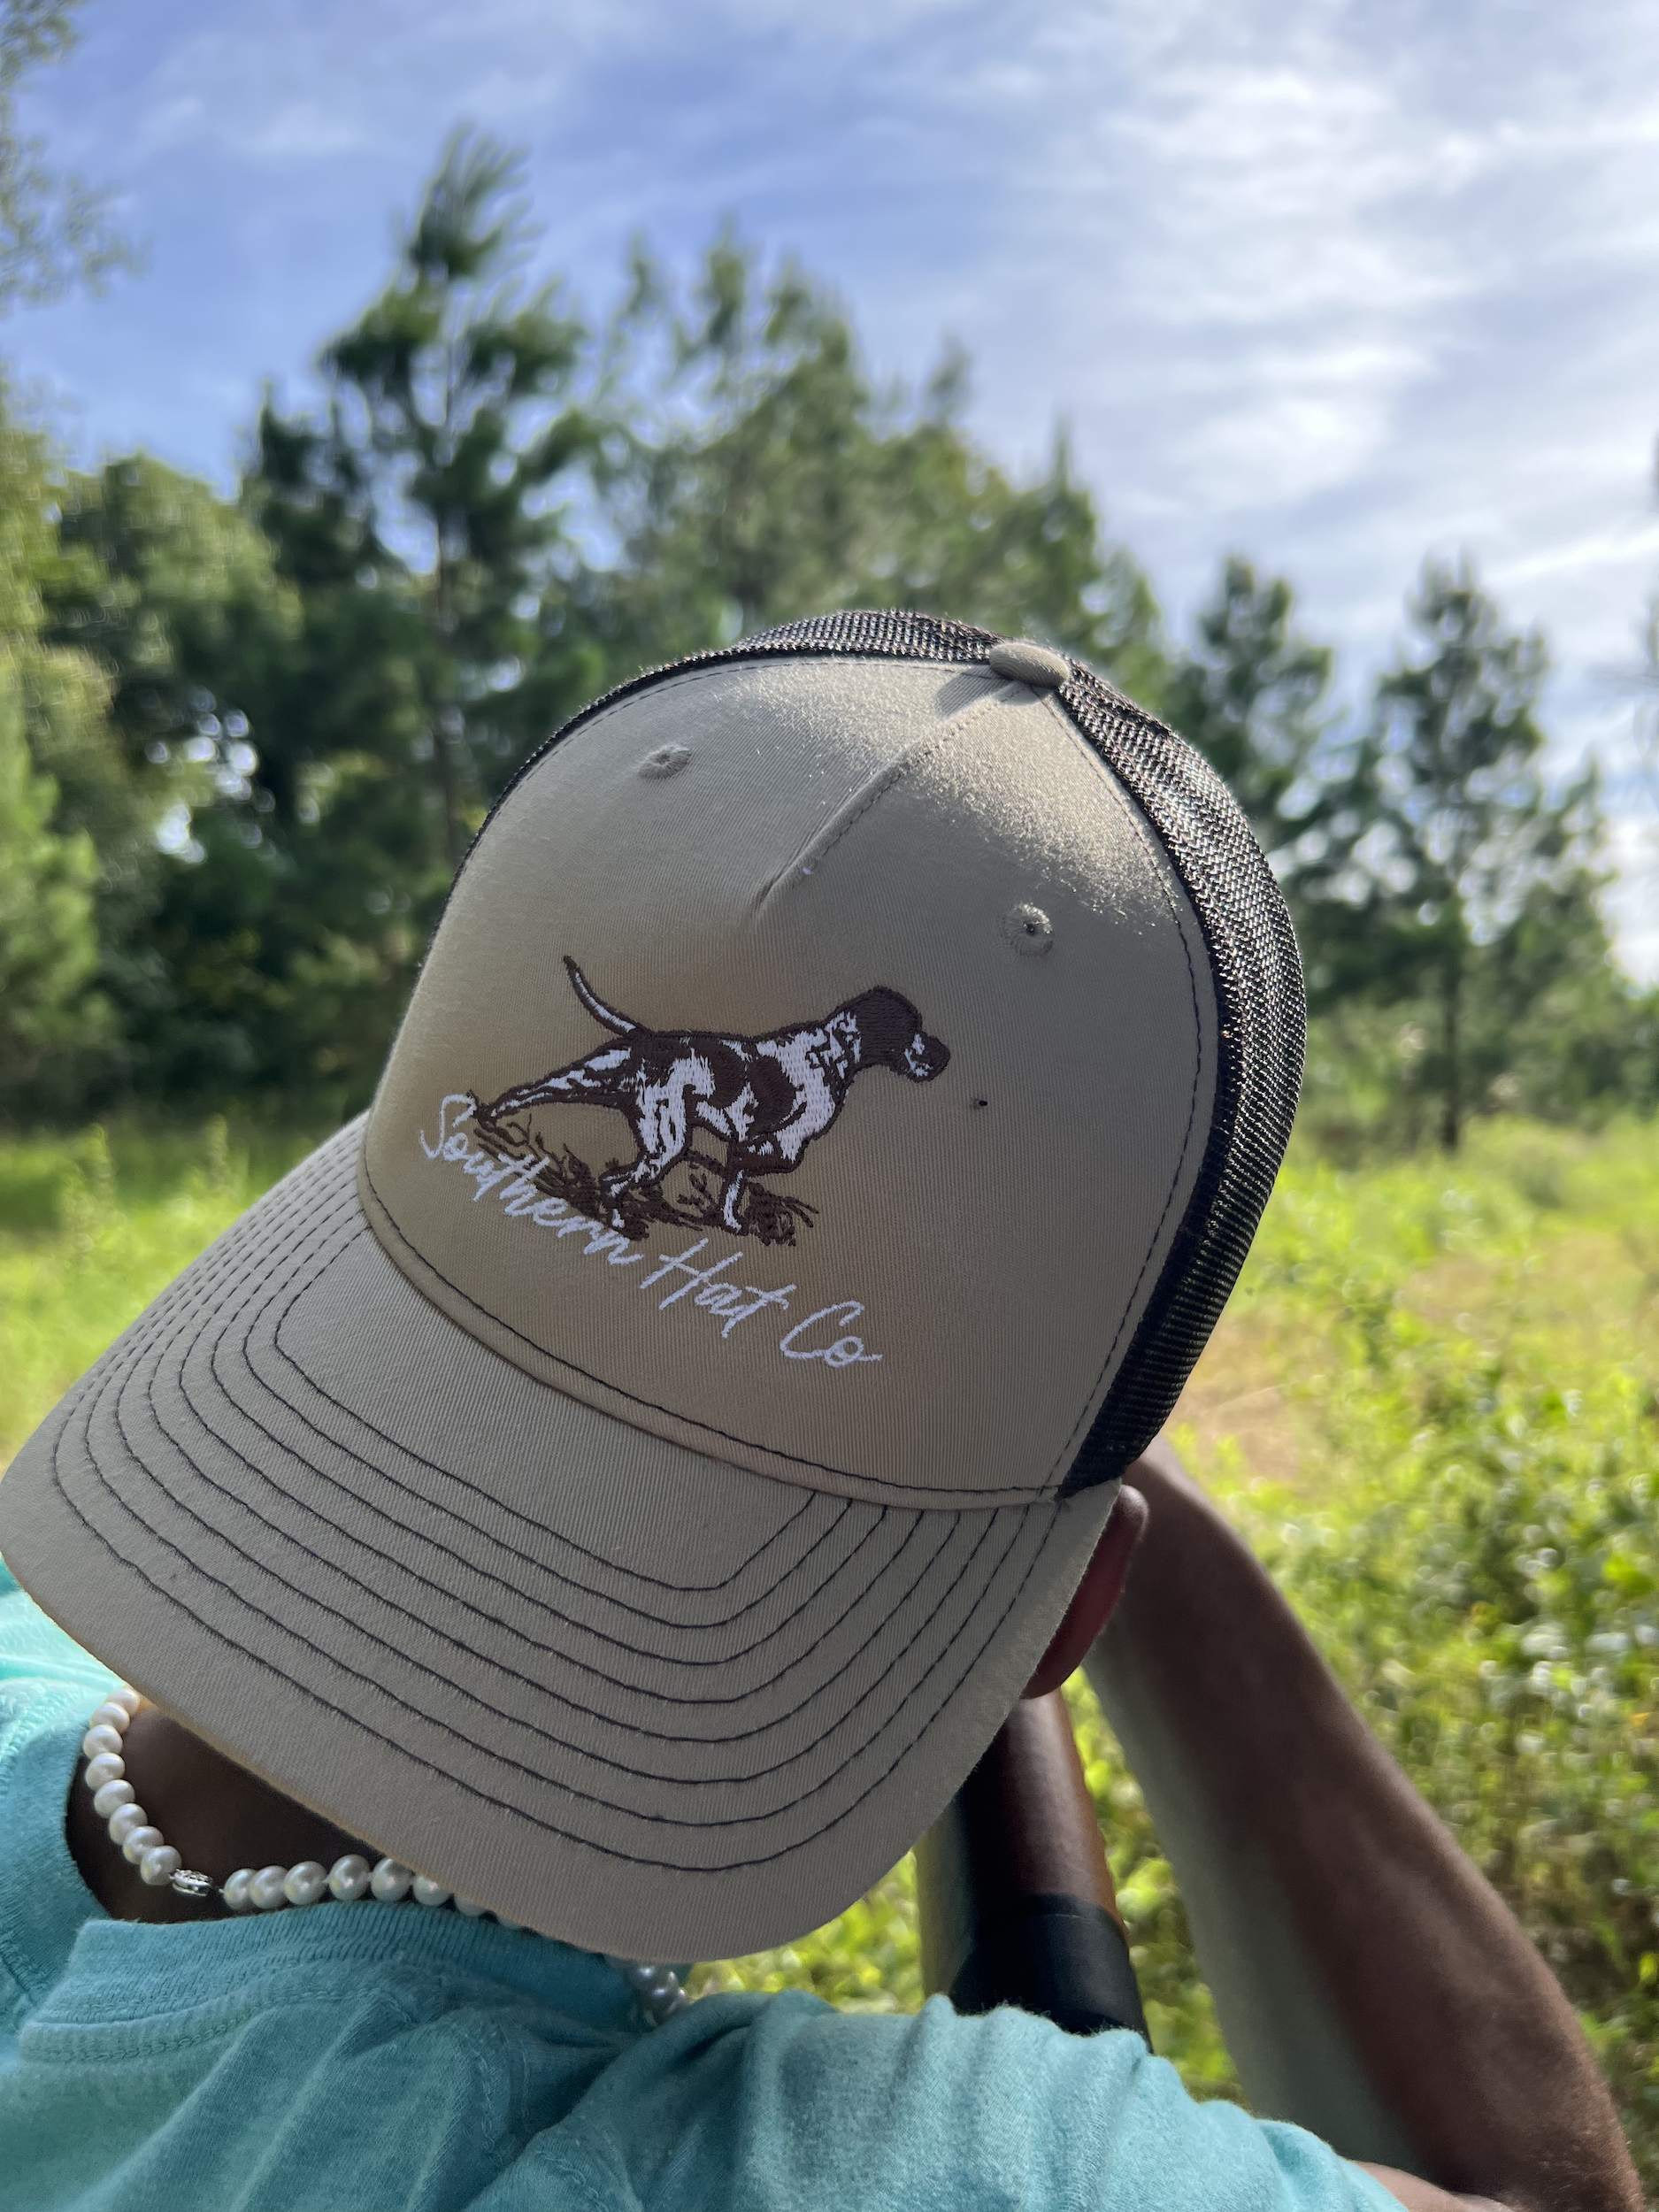 https://www.southernhatcoapparel.com/wp-content/uploads/2022/08/Copy-of-IMG_8326.png